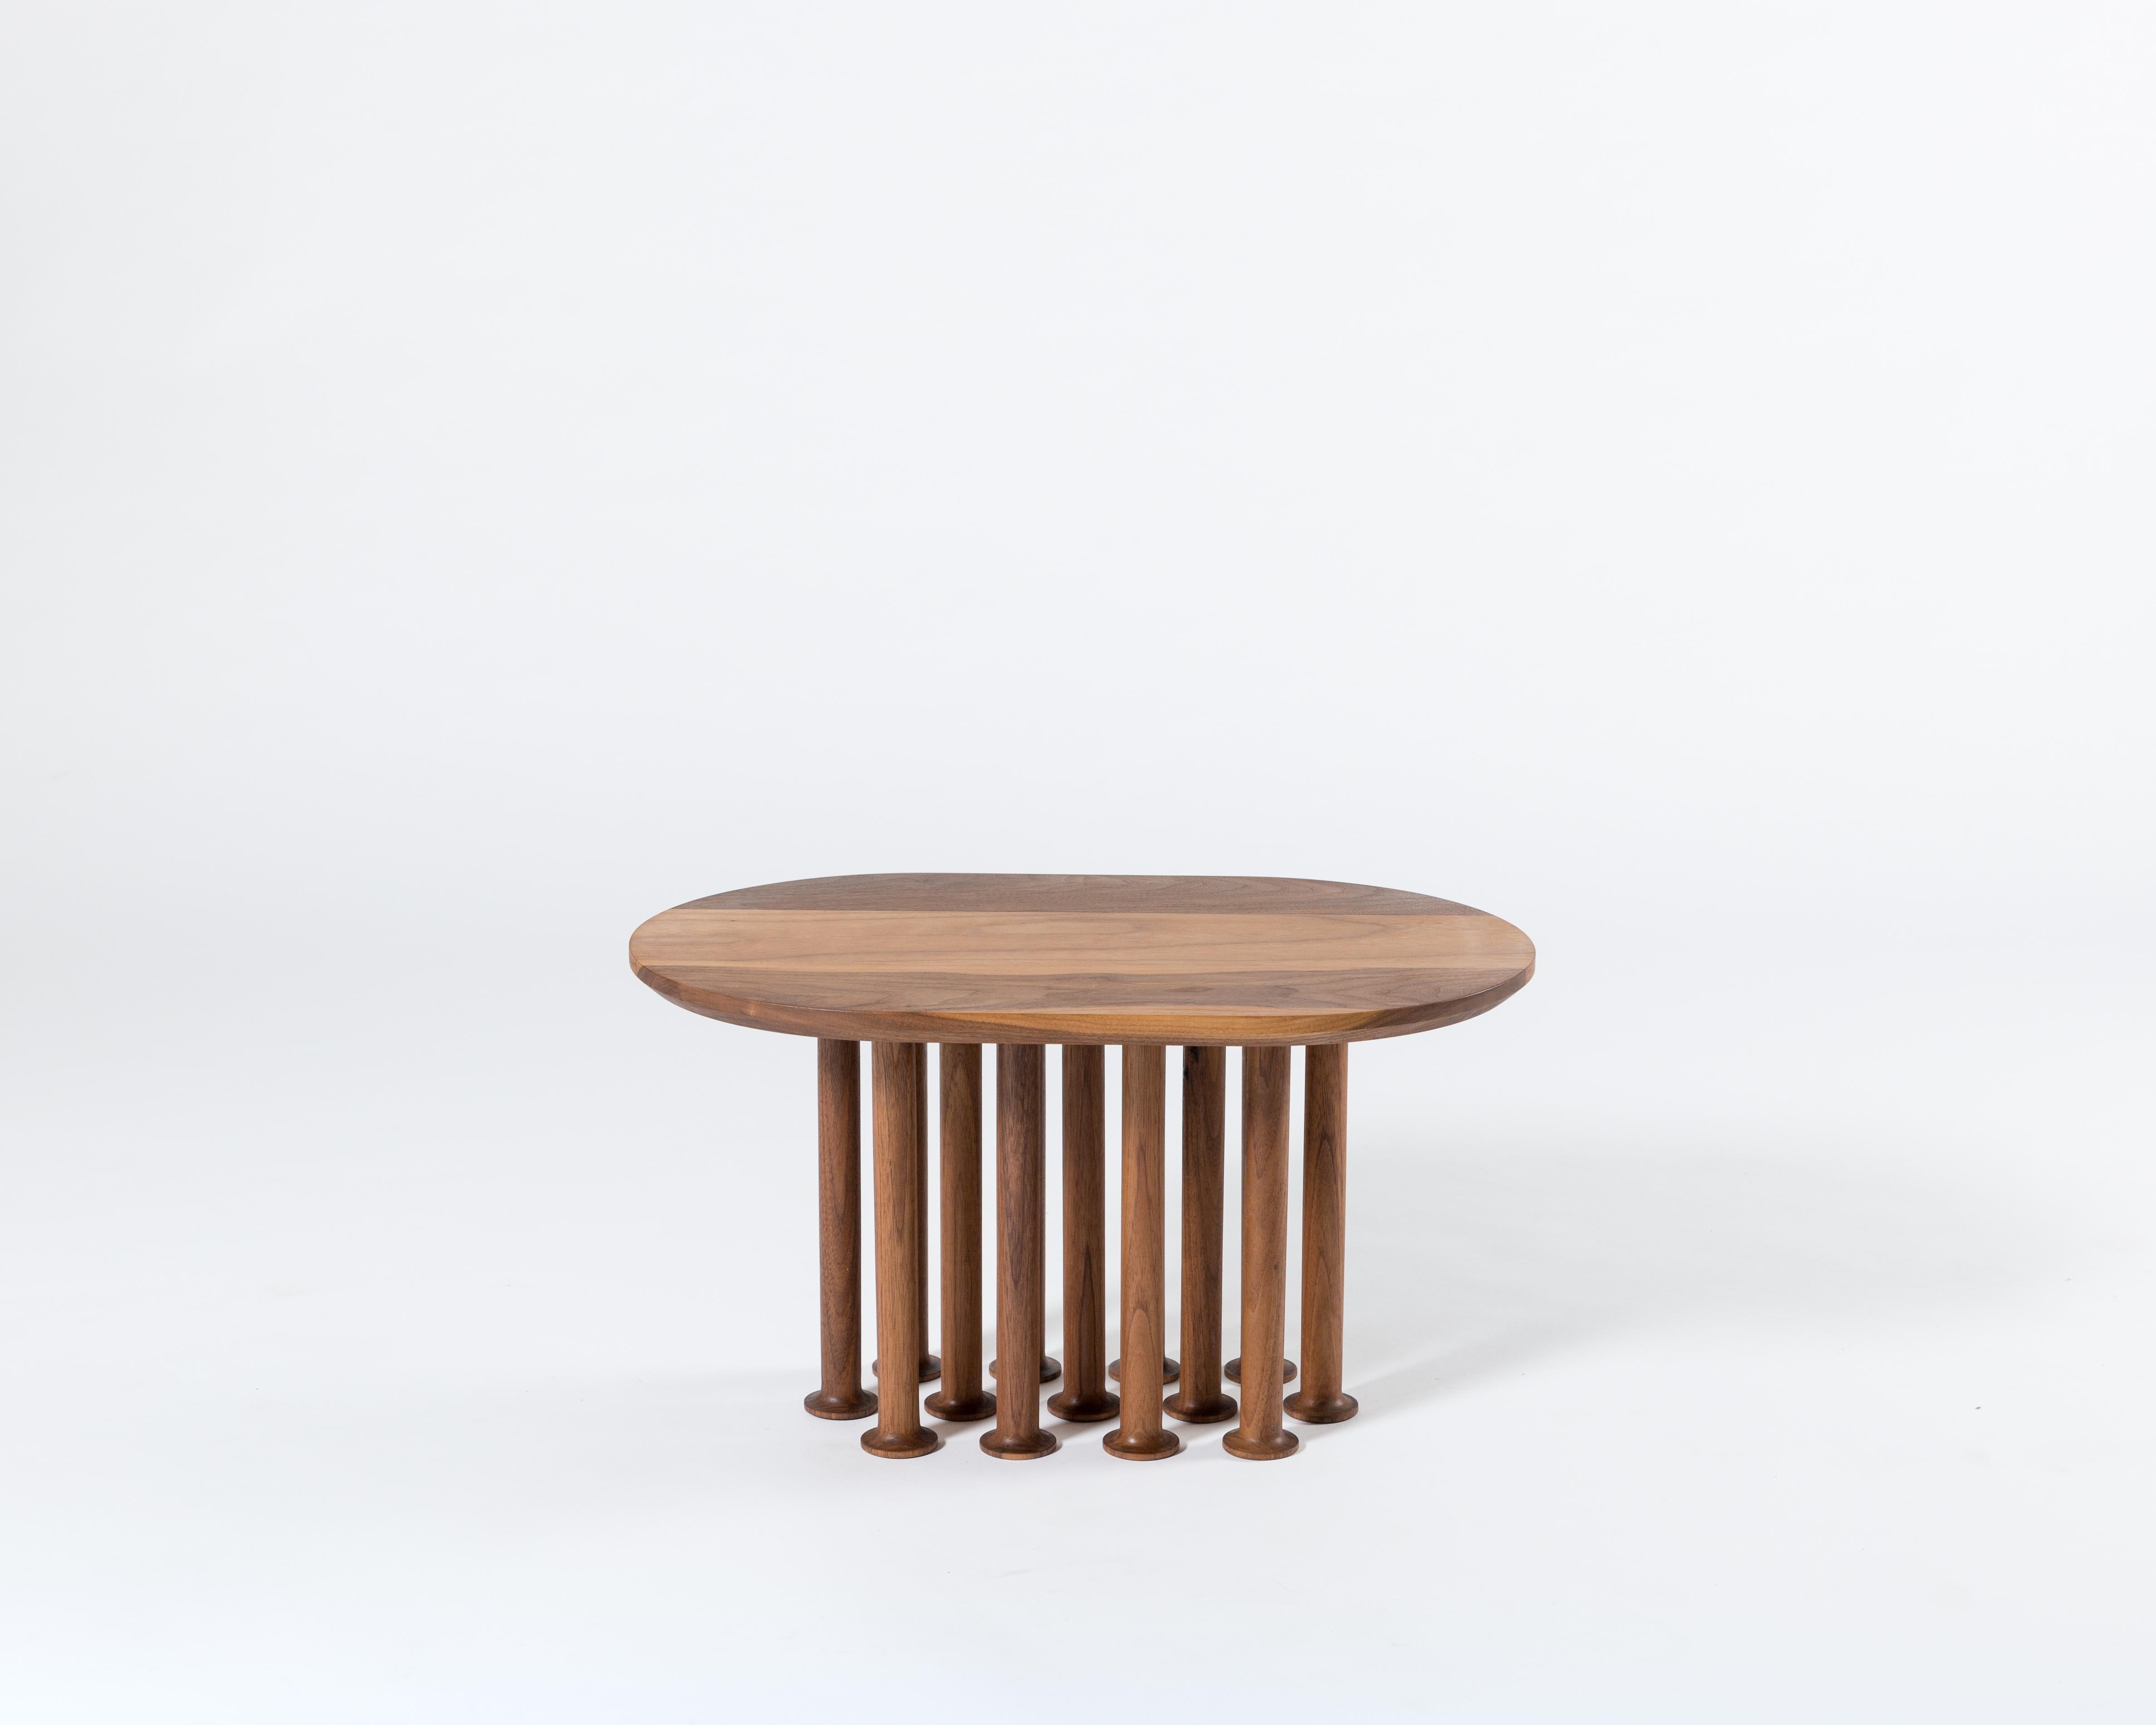 Molinillo is a collection of auxiliary and center tables designed by the Colección Estudio. Each of the legs of the tables were made manually and its intense black color was achieved by carbonizing the wood, a finish inspired by mills. The covers,